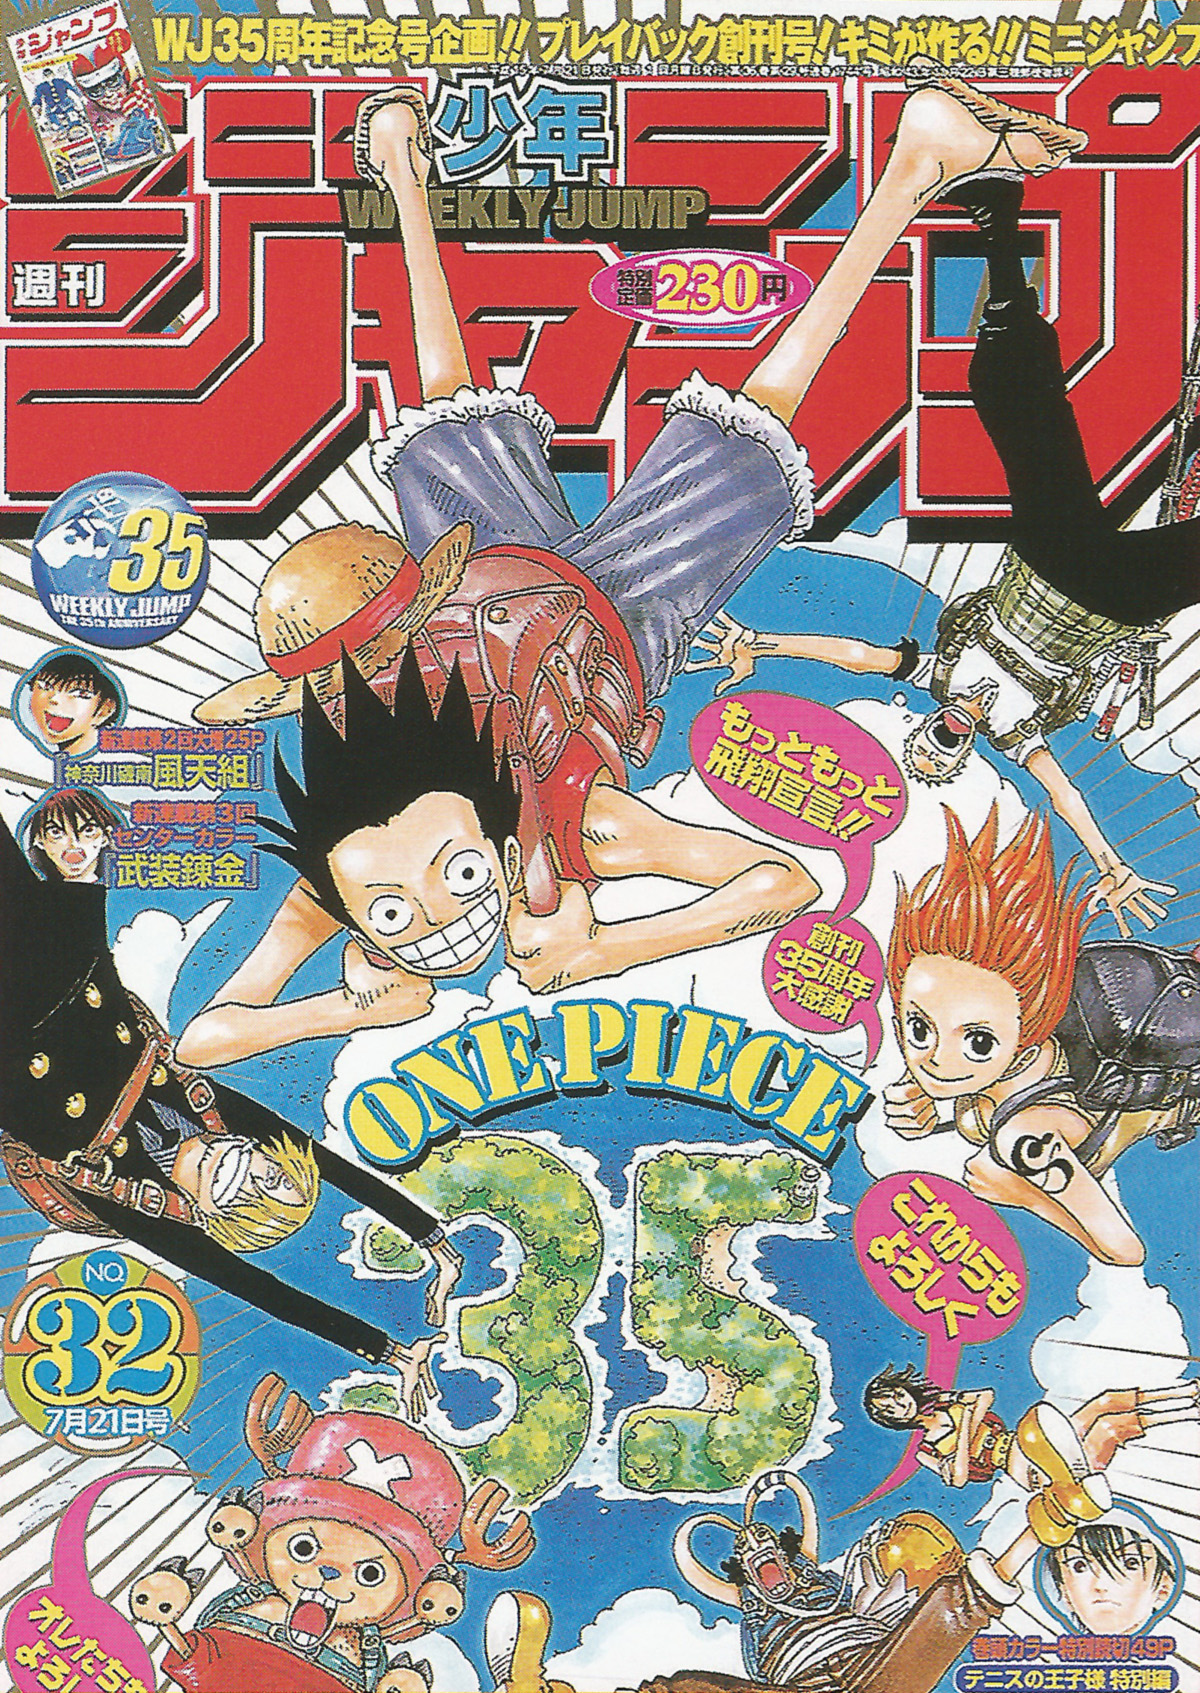 Shonen Jump Covers Check Pinned 03 No 32 Cover One Piece By Eiichiro Oda T Co Ejtmatwg5n Twitter